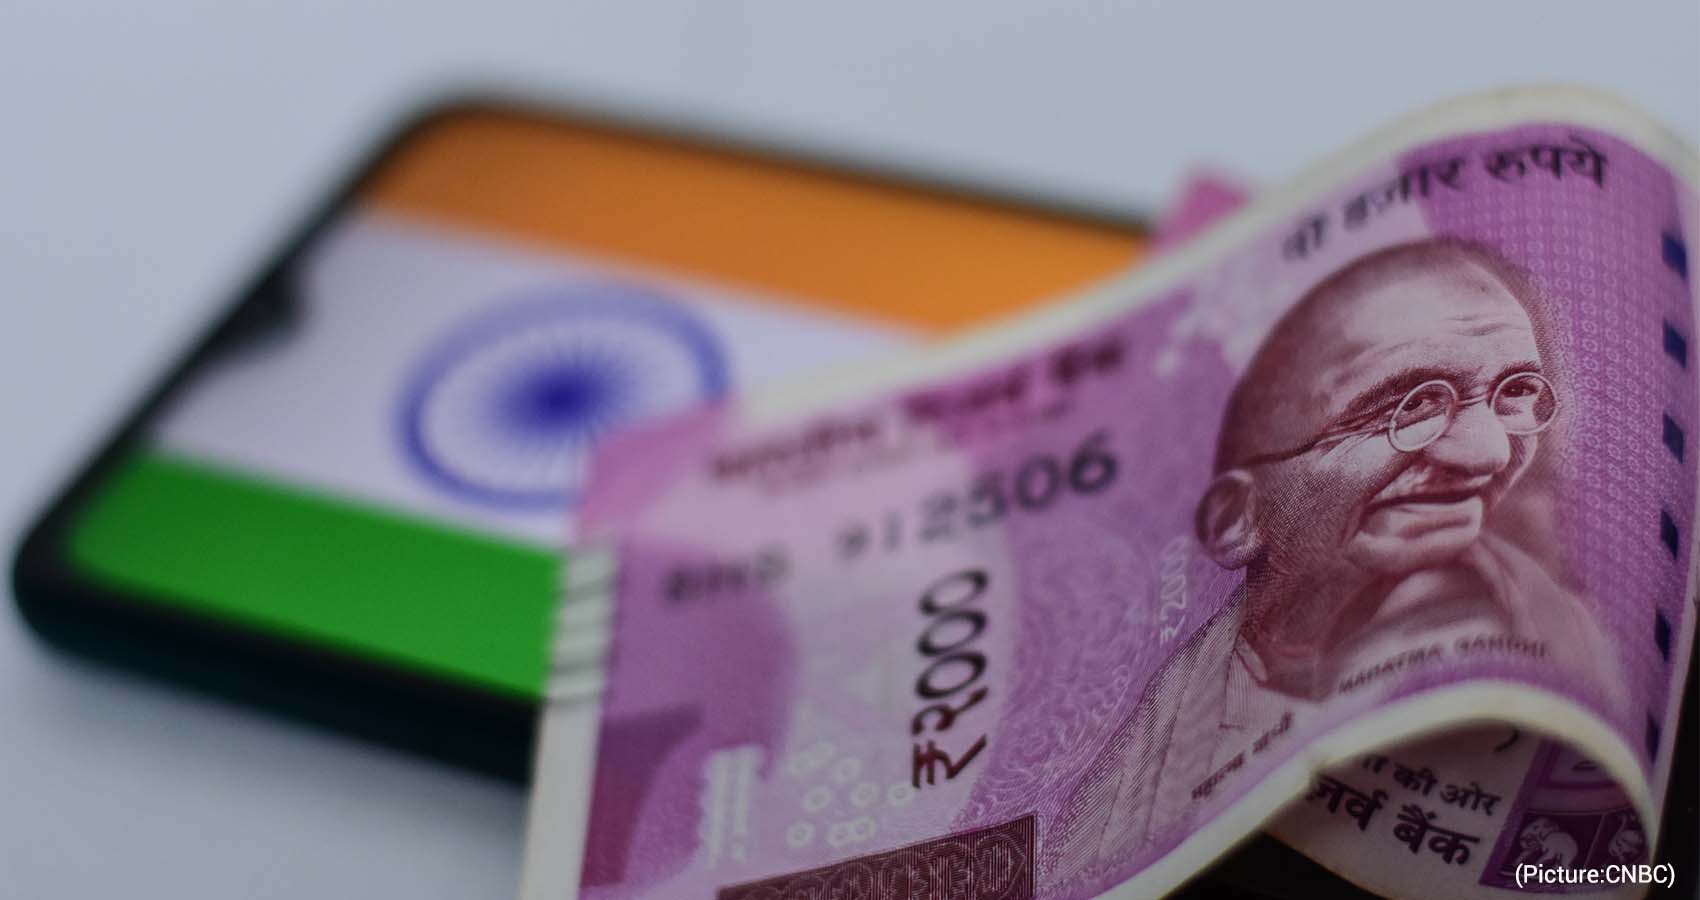 India To Launch Its Own Digital Currency In 2022-2023